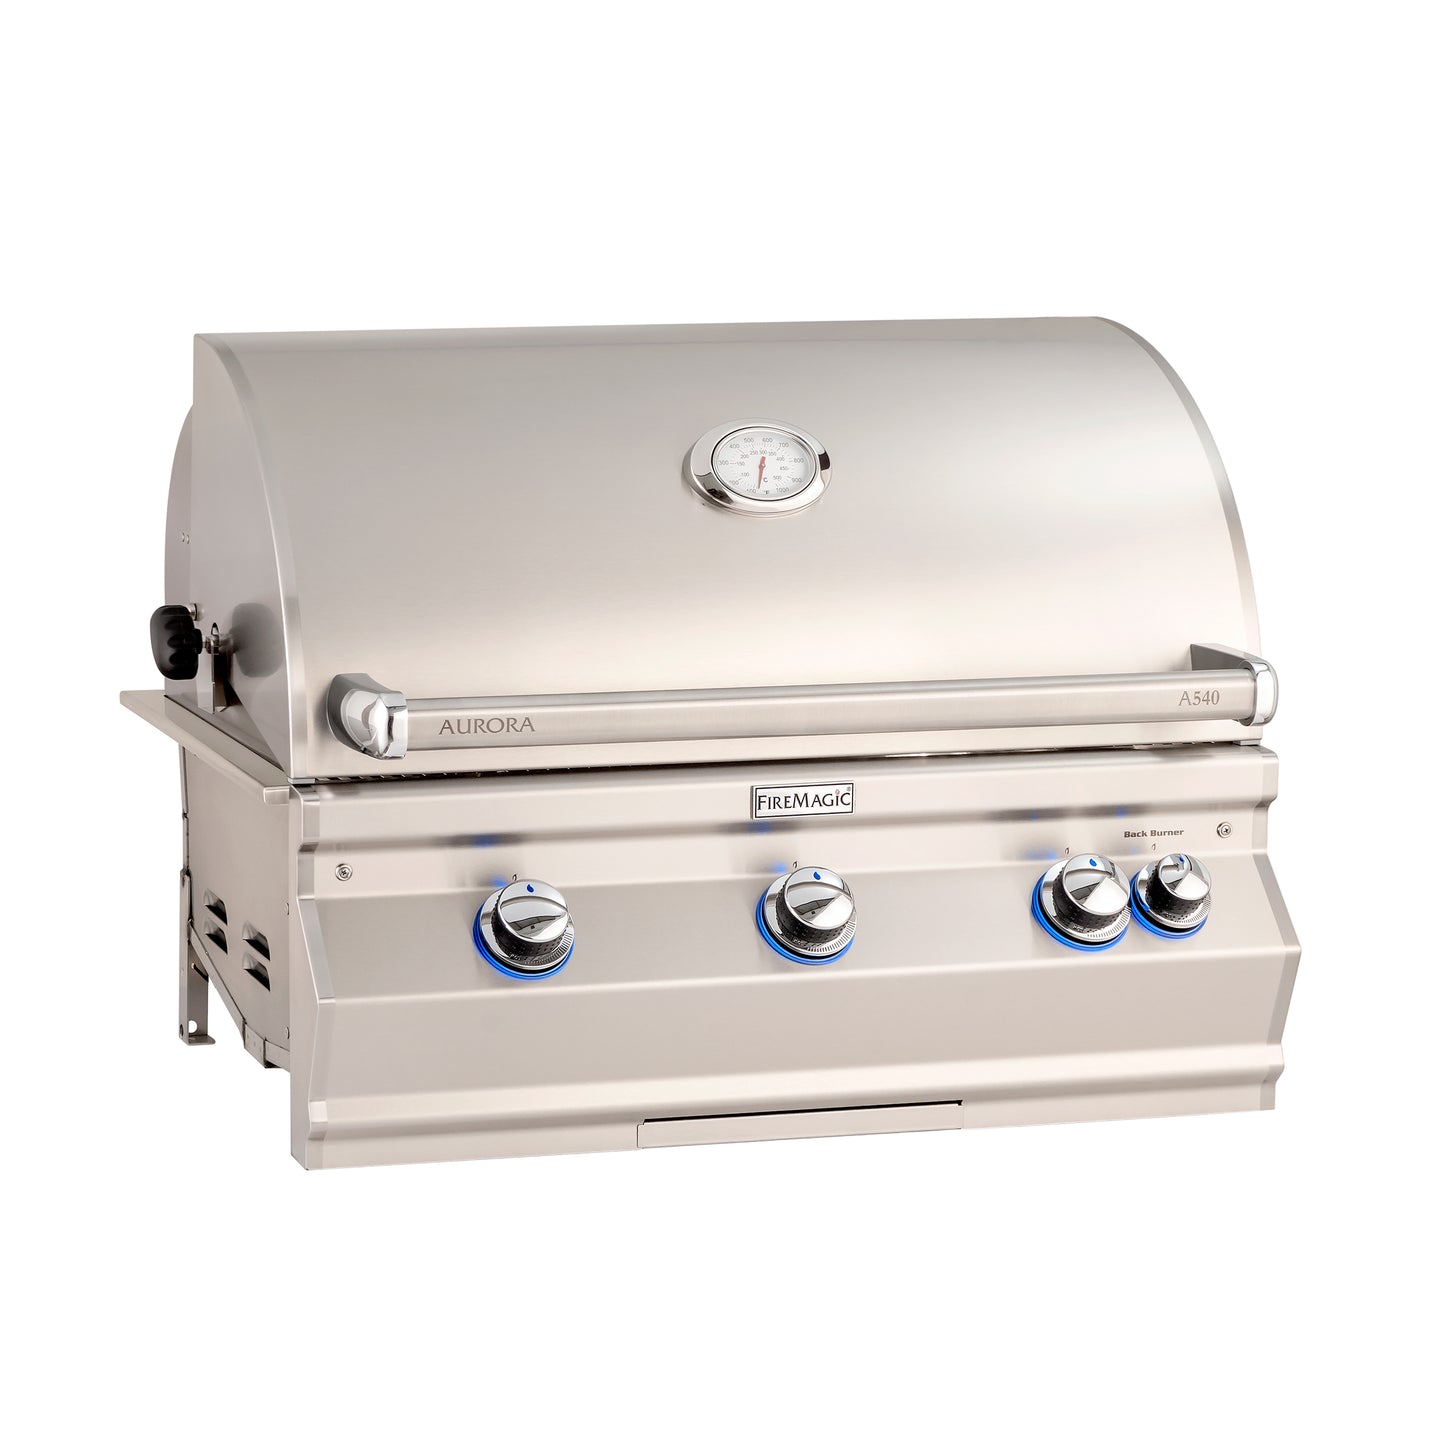 FireMagic Aurora A540i Built-In 30 in. Grill with Analog Thermometer